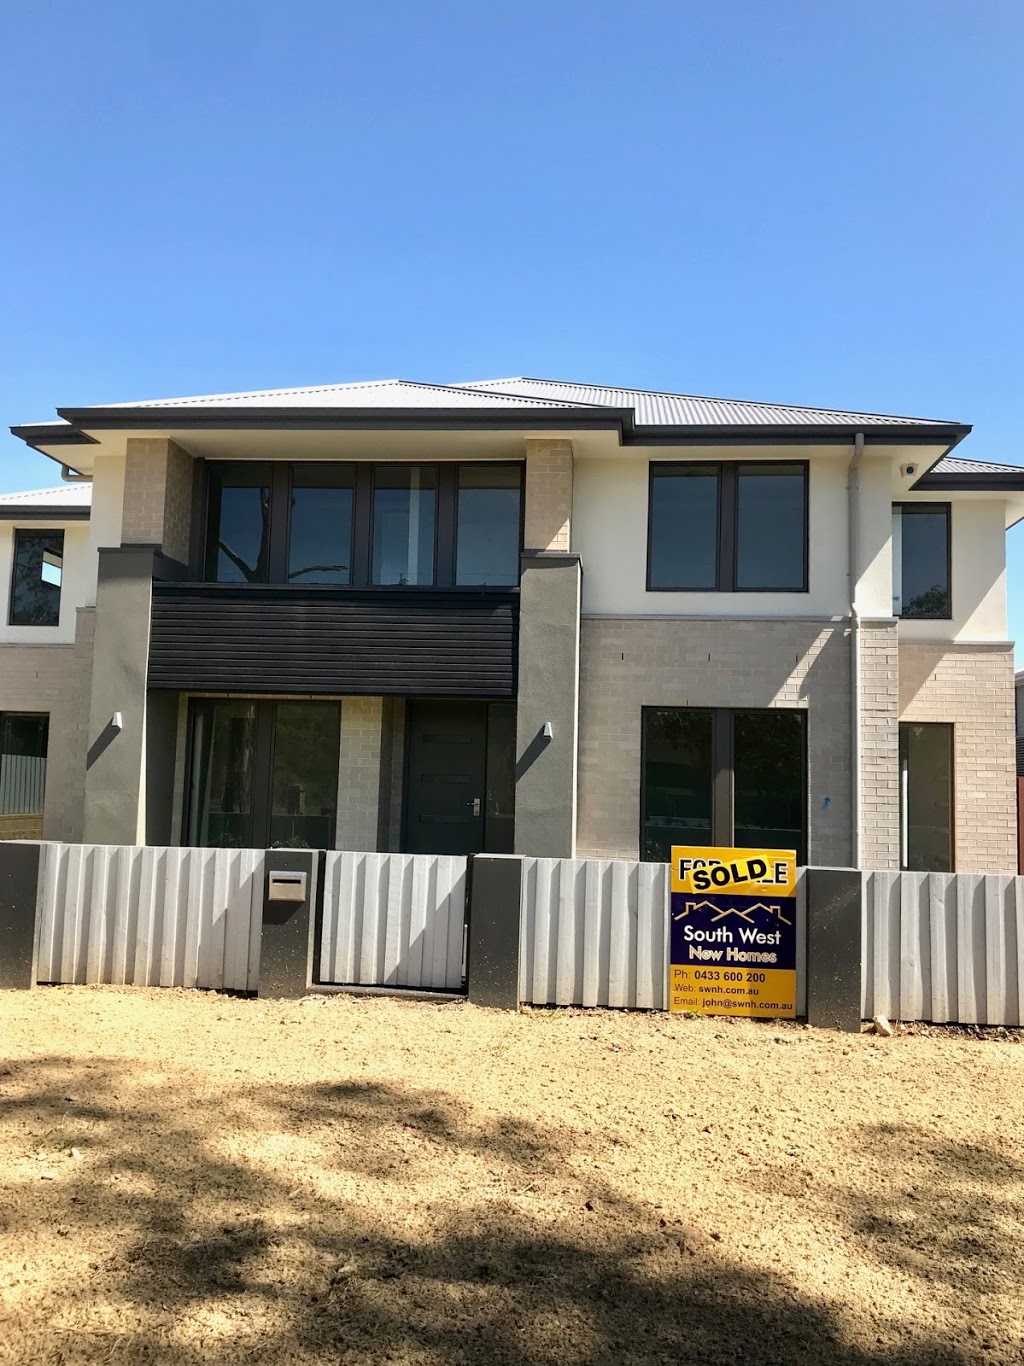 South West New Homes | real estate agency | 8a/38 Exchange Parade, Narellan NSW 2567, Australia | 0433600200 OR +61 433 600 200